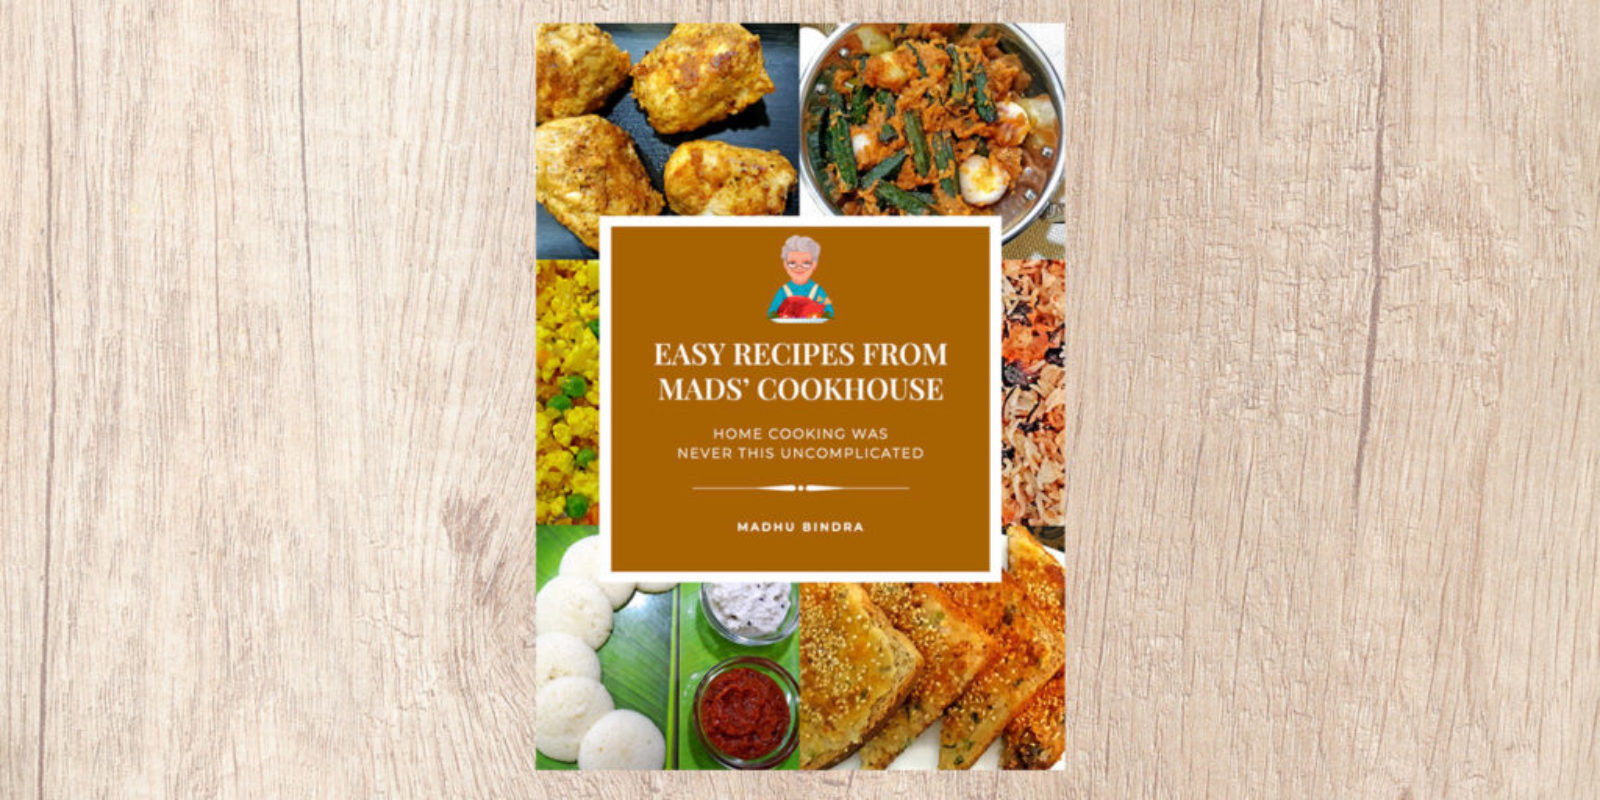 Easy-Recipes-from-Mads-Cookhouse-by-Madhu-Bindra